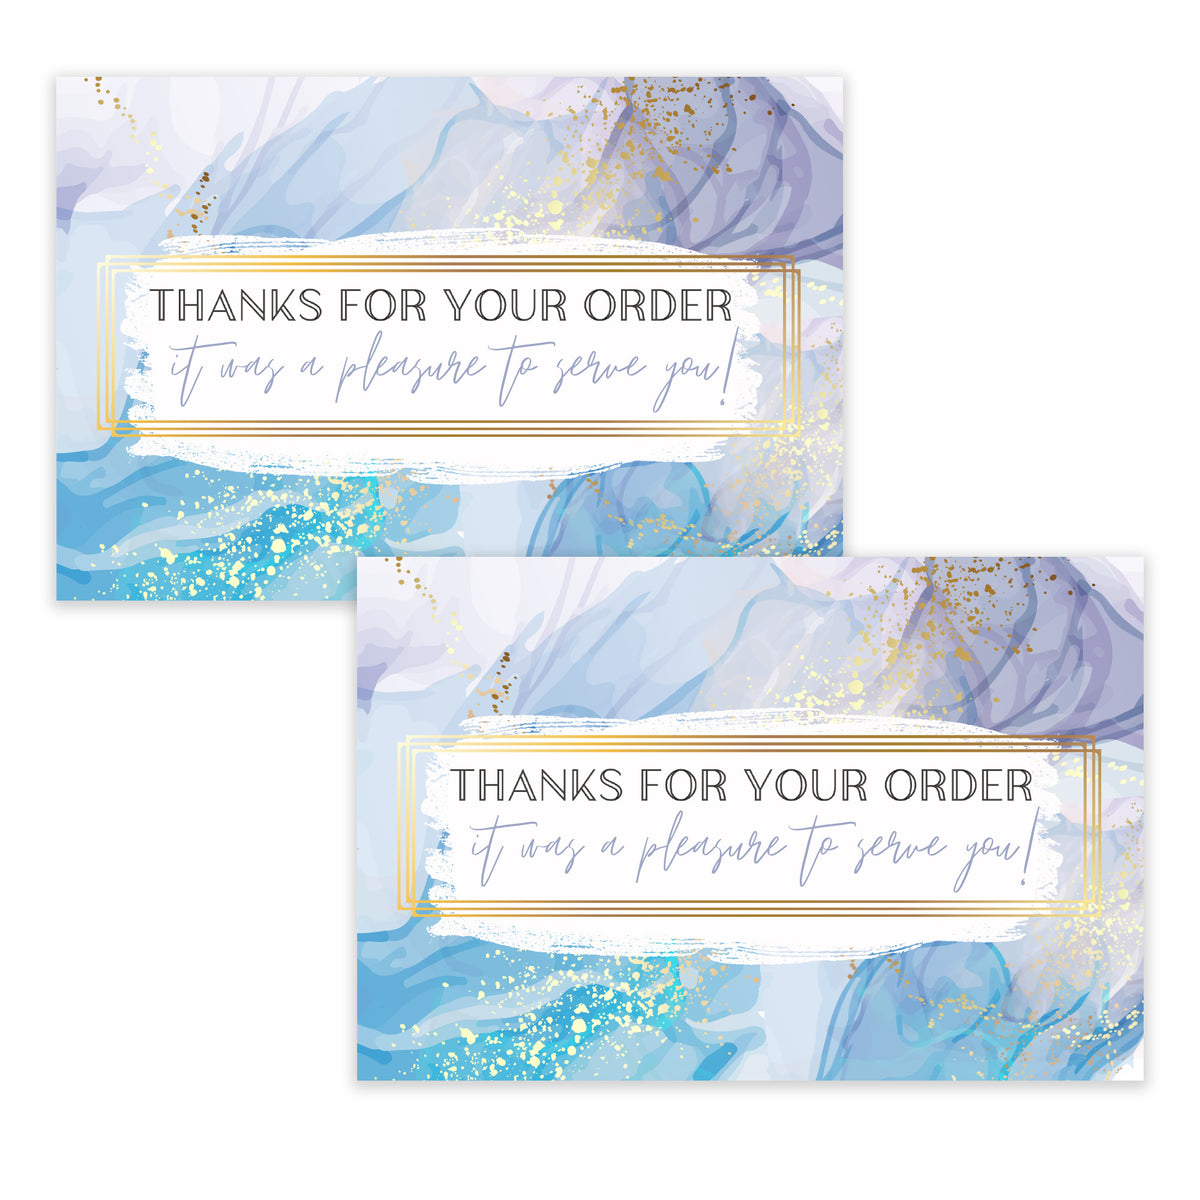 Pre-Printed Thank you Cards on 4x6 Discount Card Stock - 50 pack